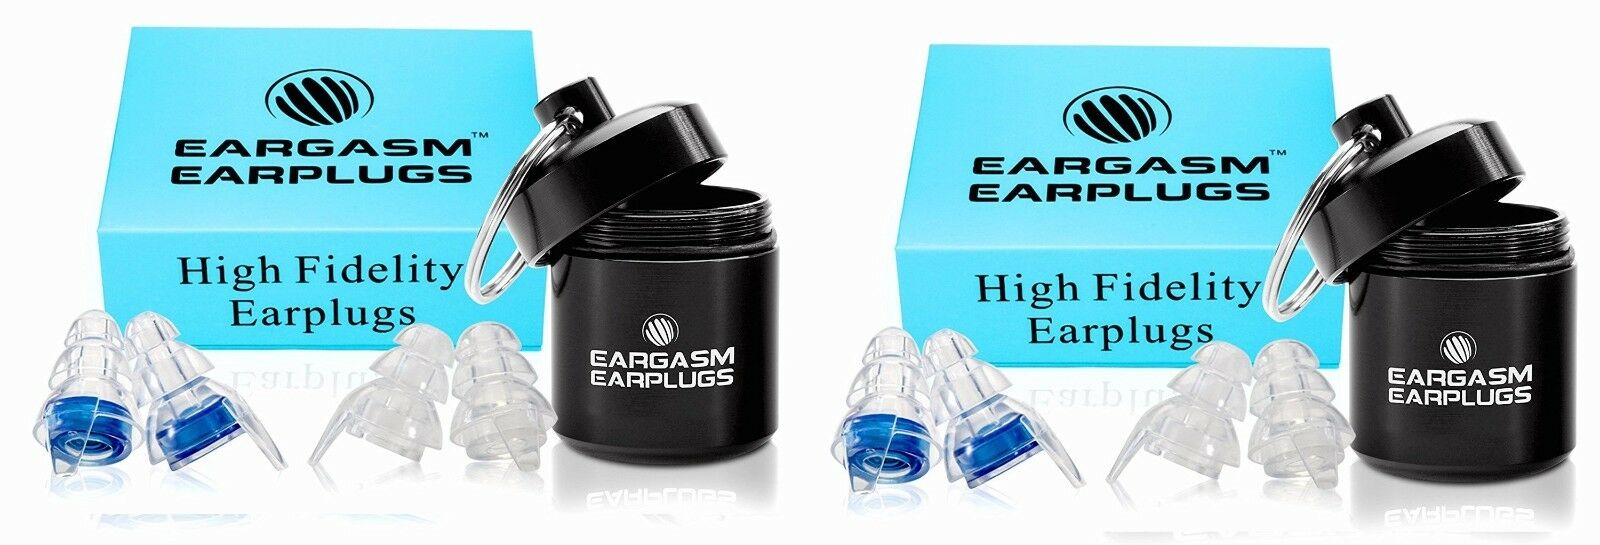 2 Sets Of Pre-owned Eargasm High Fidelity Earplugs Reduce Up To 21 Db Nrr 16 Db